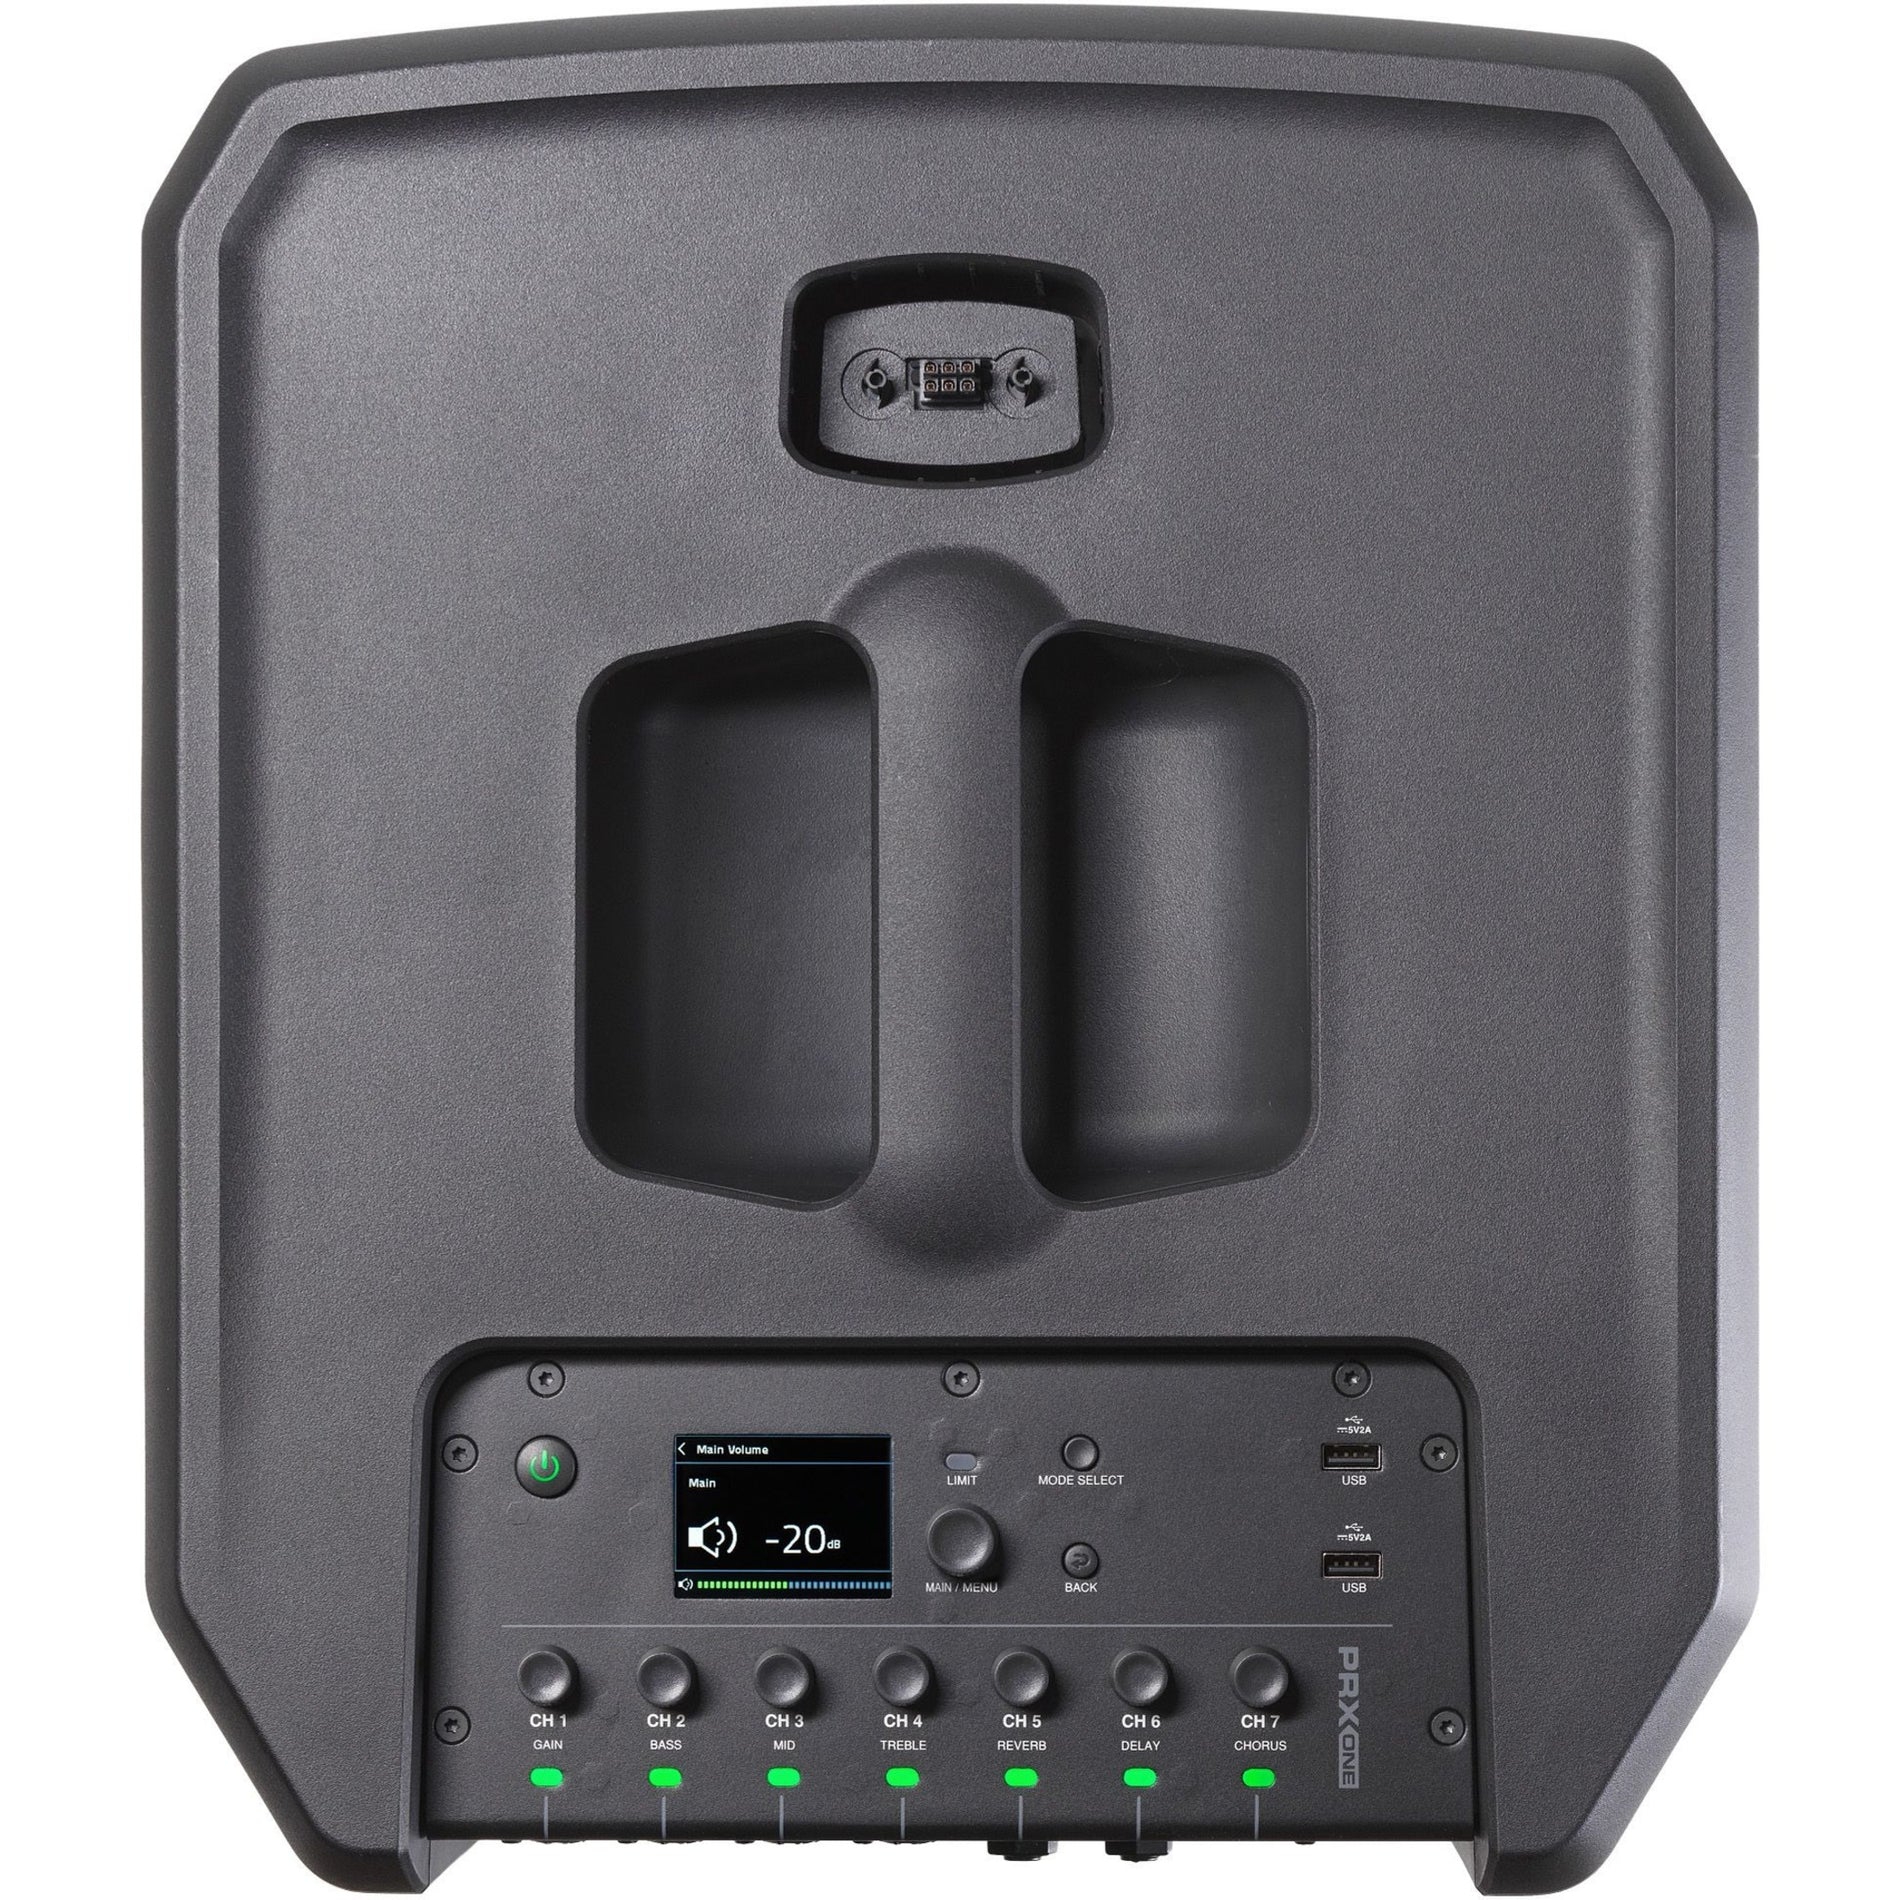 JBL JBL-PRXONE-NA ALL-IN-ONE POWERED COLUMN PA WITH MIXER AND DSP, 2000 W Amplifier, Wireless Microphone, Bluetooth, USB Port, Wall Mount